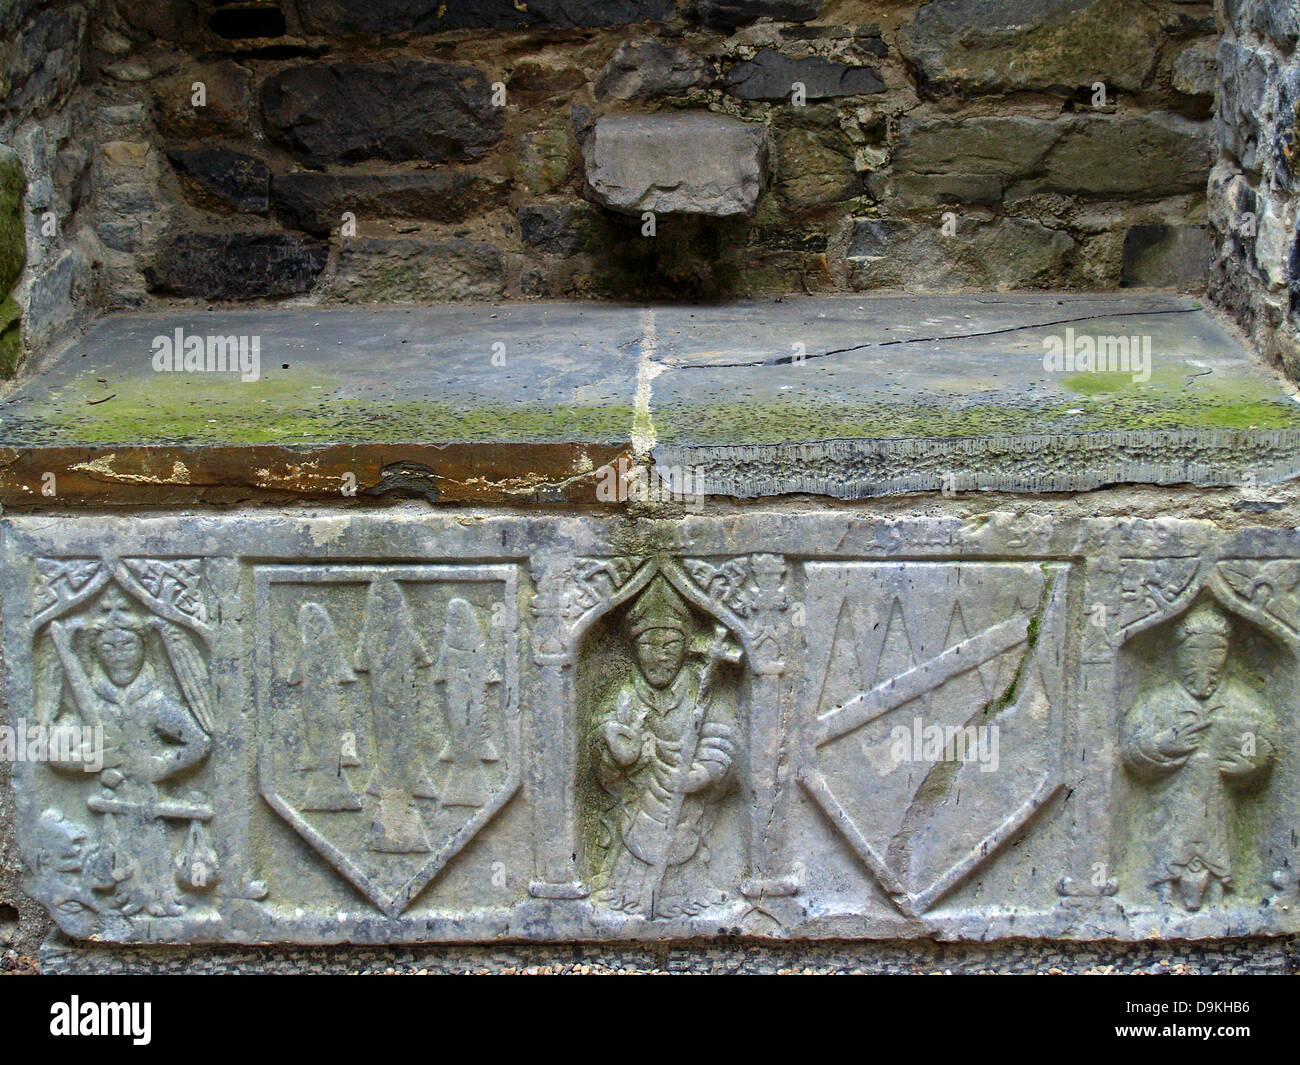 Carvings on a tomb chest,Rock of Cashel,County Tipperary,Ireland Stock Photo